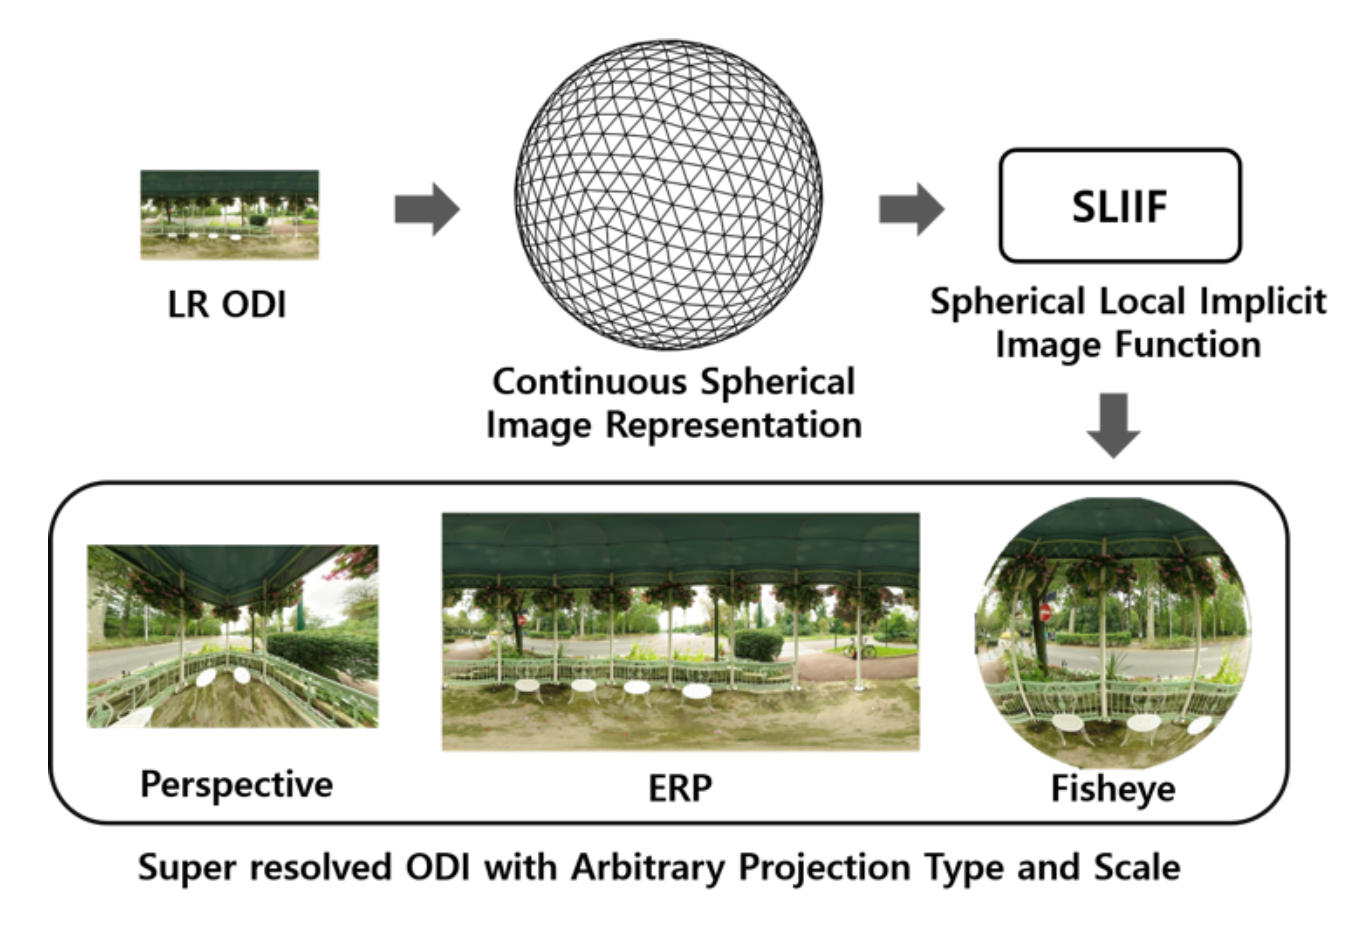 Learning continuous spherical image representation. The method leverages SLIIF to predict RGB values at given spherical coordinates for SR with arbitrary image projection types (perspective, ERP and Fisheye projection).